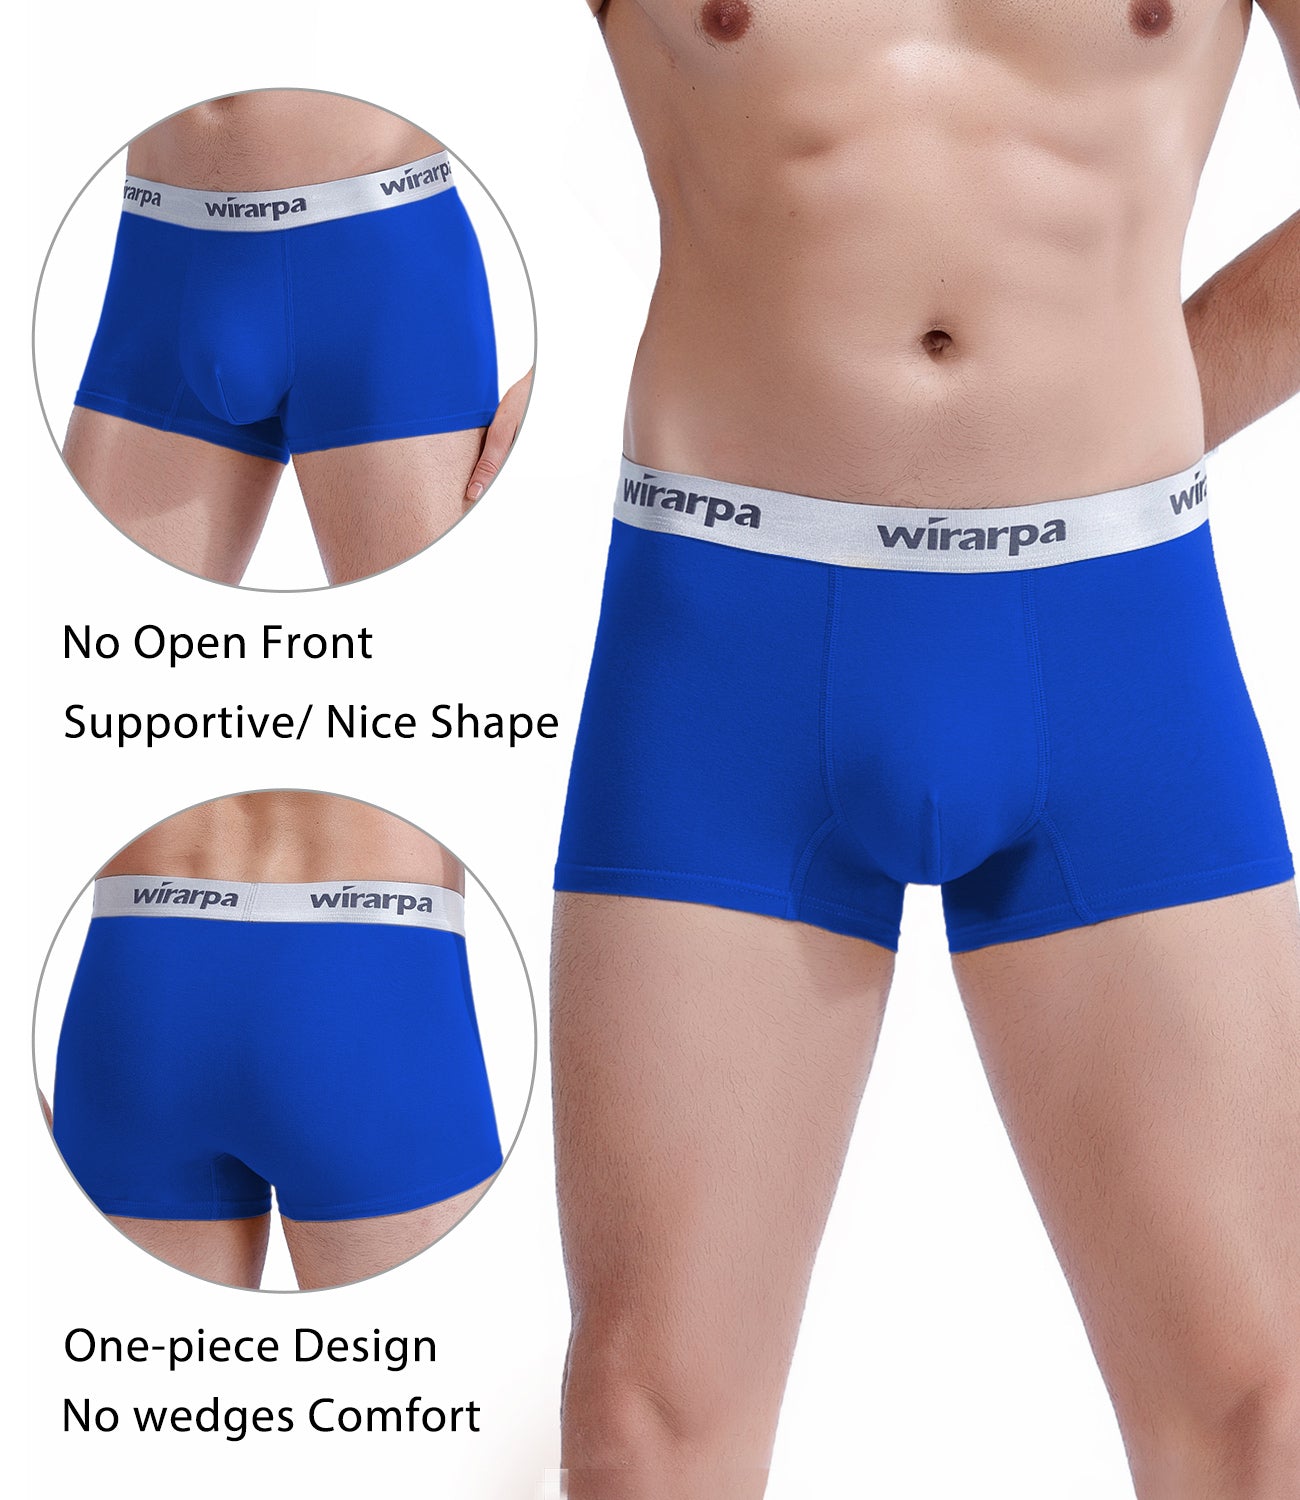 wirarpa Men's Tagless Cotton Stretch Trunks with Wide Waistband 4